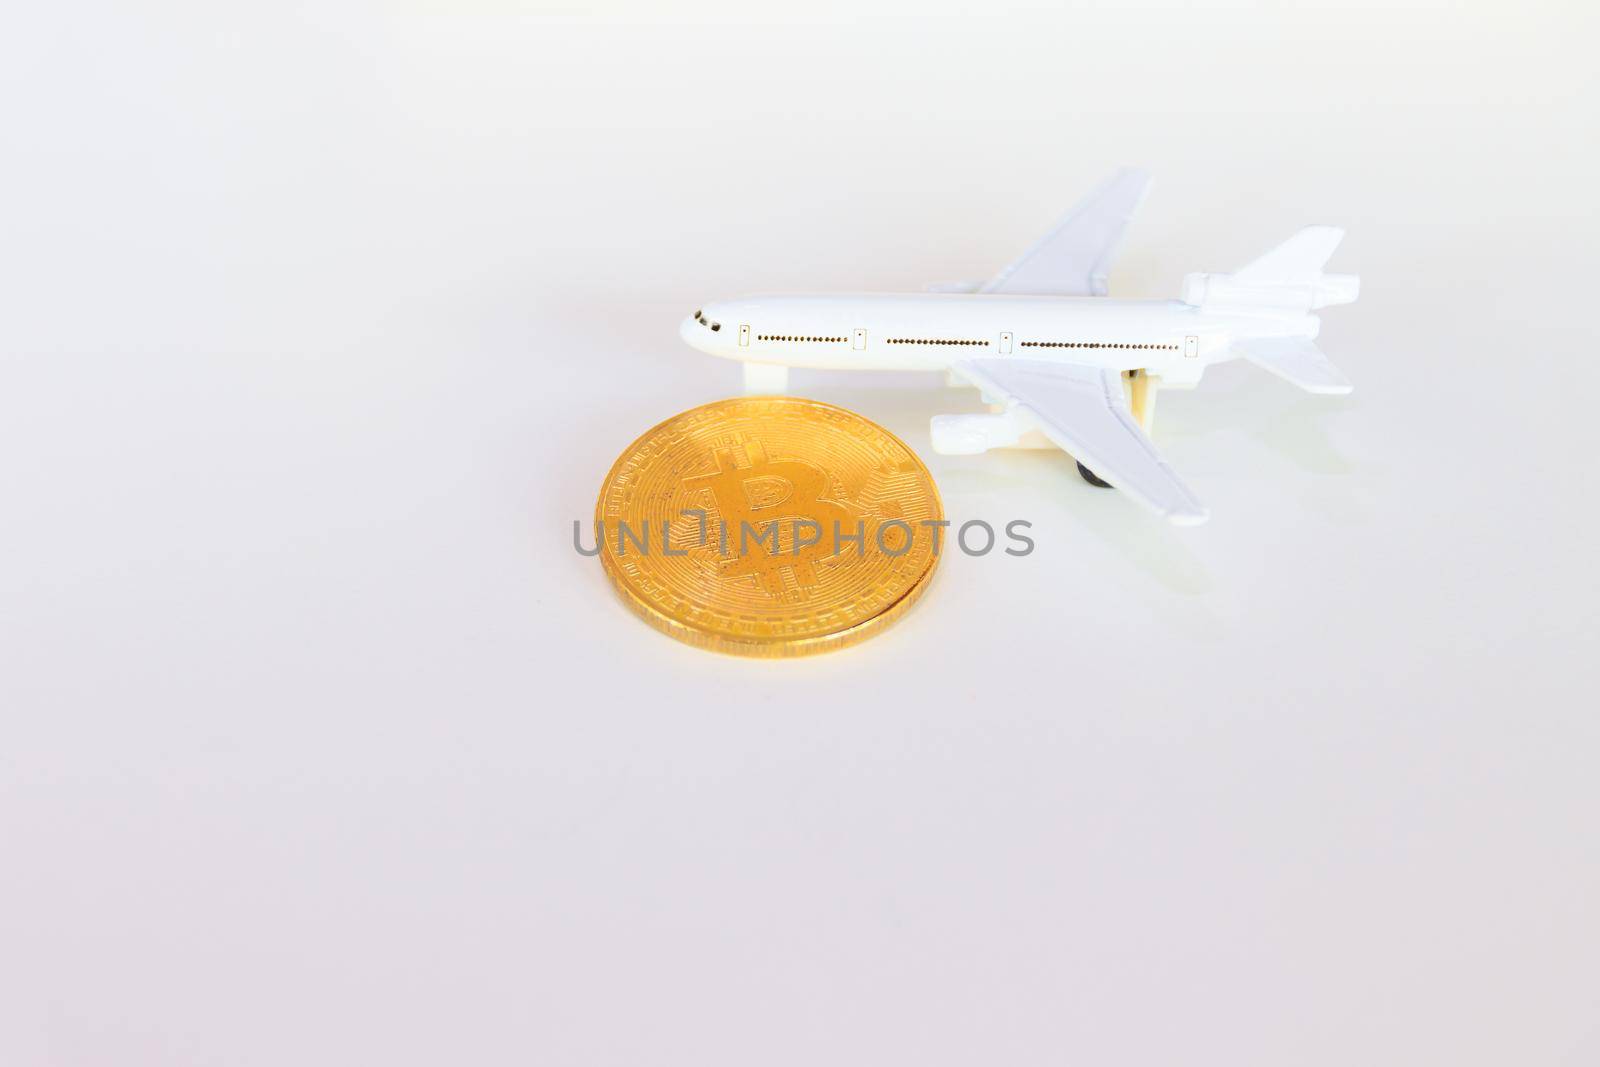 bitcoin coins and model of passenger plane  over white on black background. with copy space add text